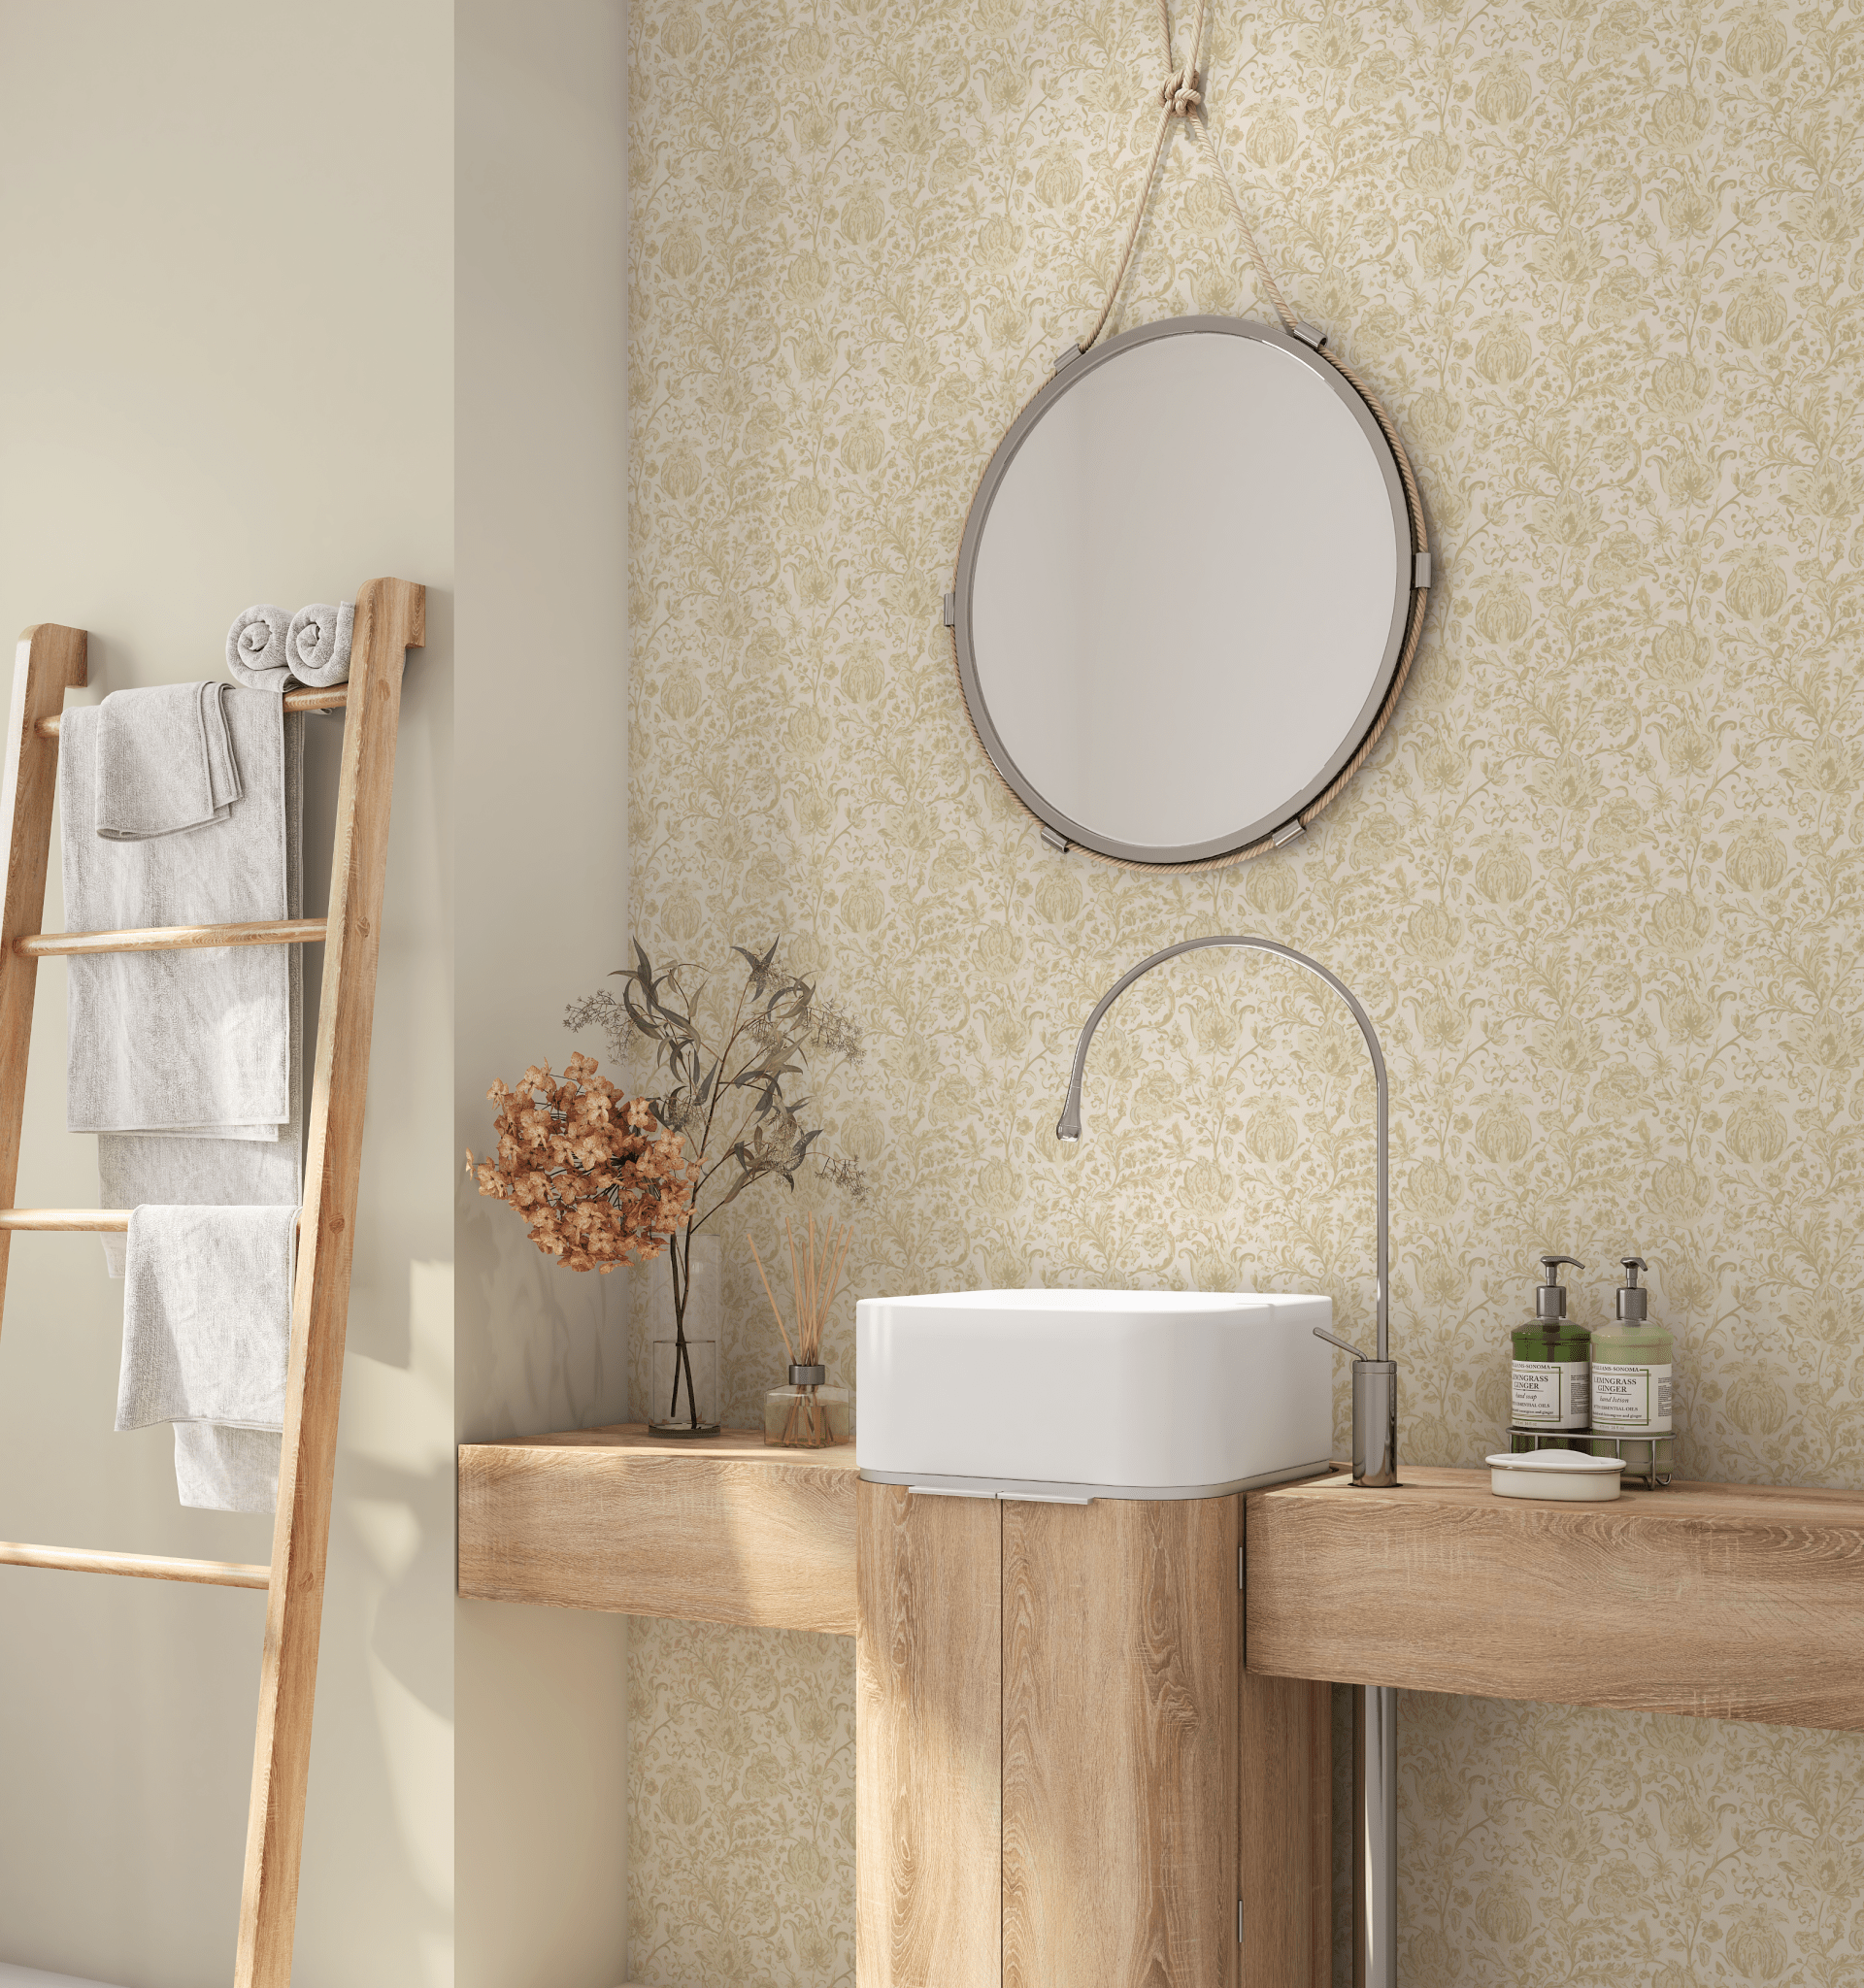 Bathroom showcasing beige brocade wallpaper with an intricate, vintage floral design for a classic look.